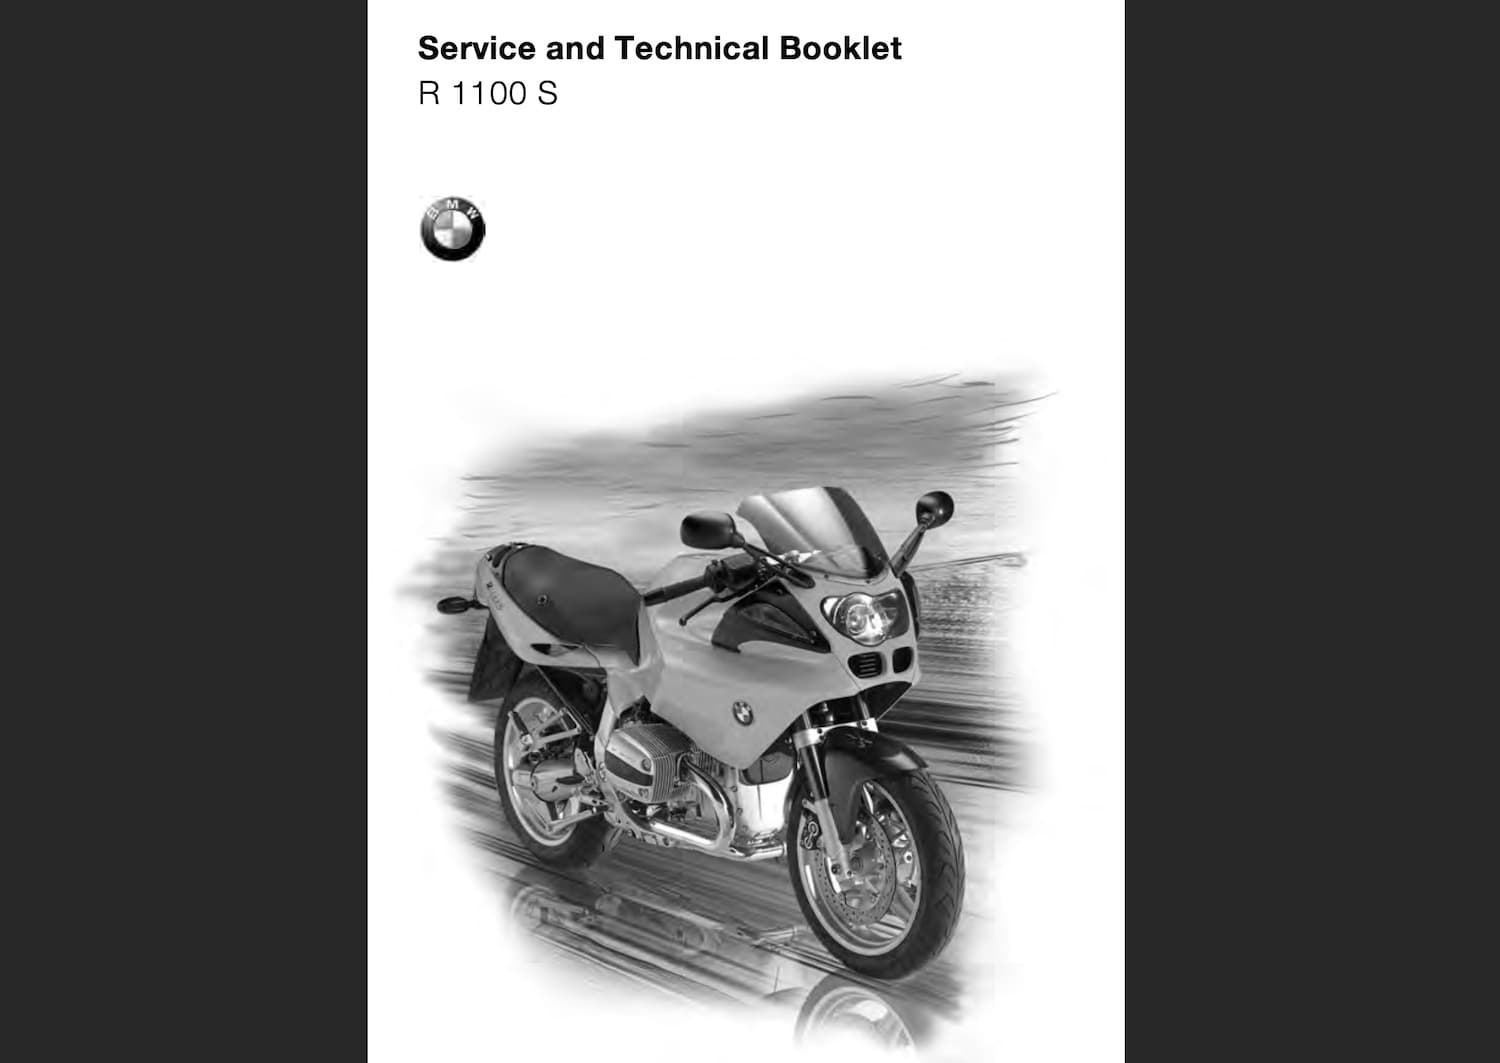 BMW R 1100 S Service and Technical Booklet screenshot 1